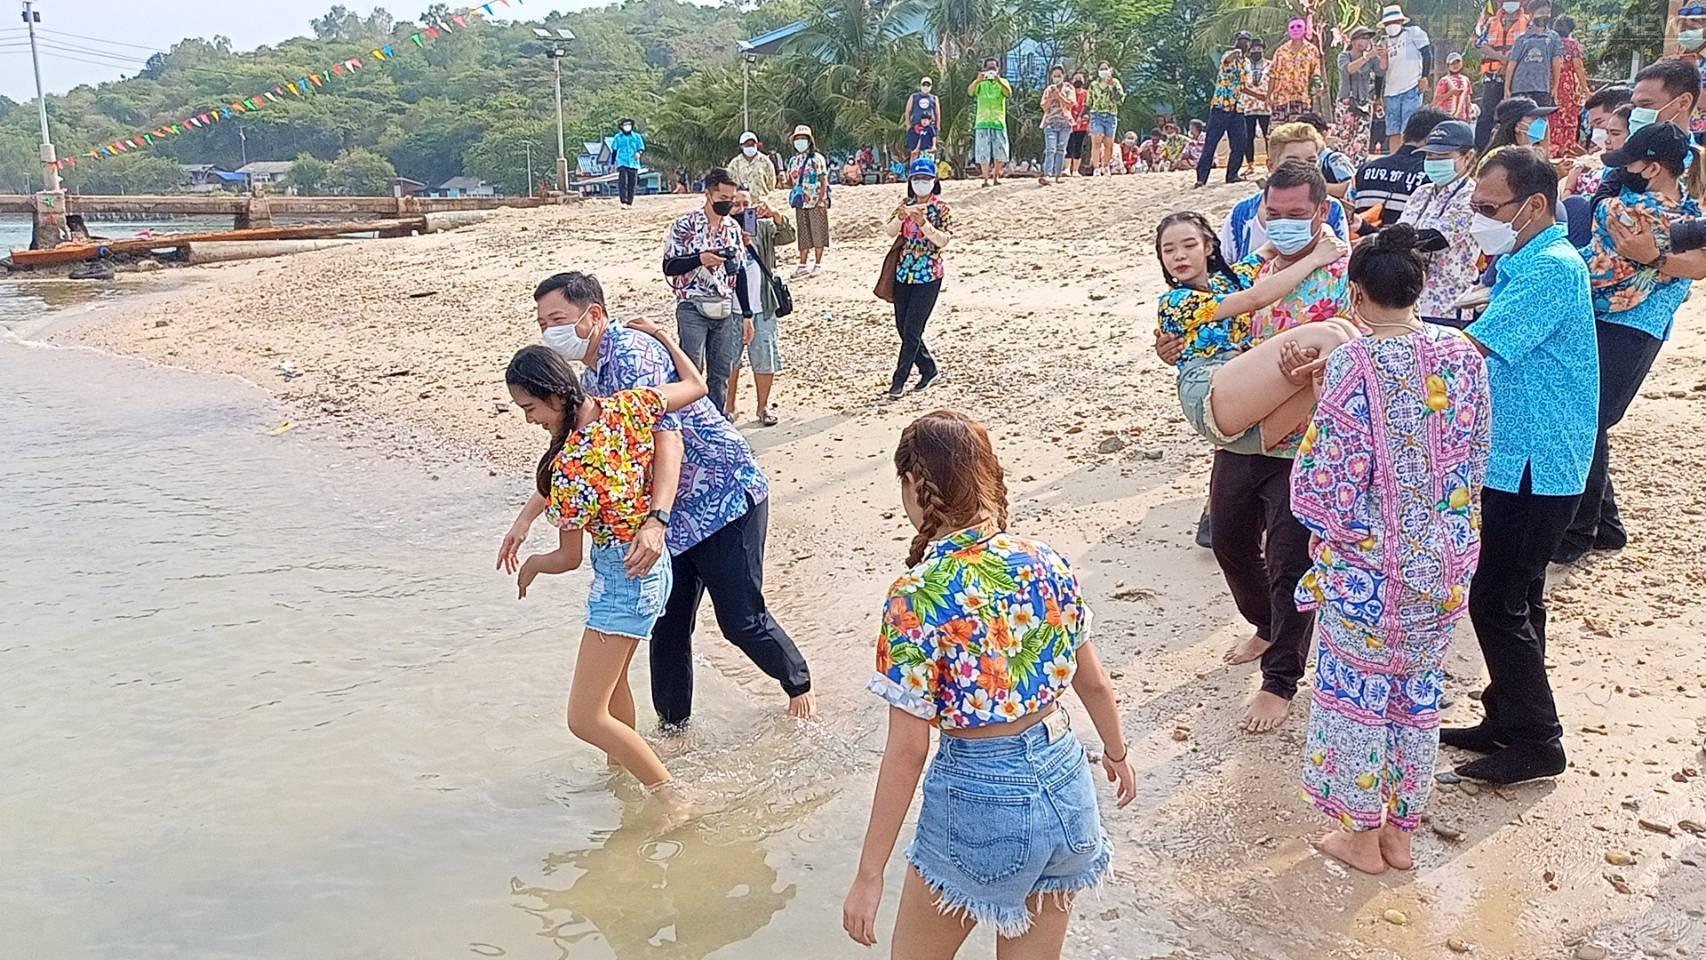 Video: A unique Songkran tradition on Koh Si Chang-Carrying women into water